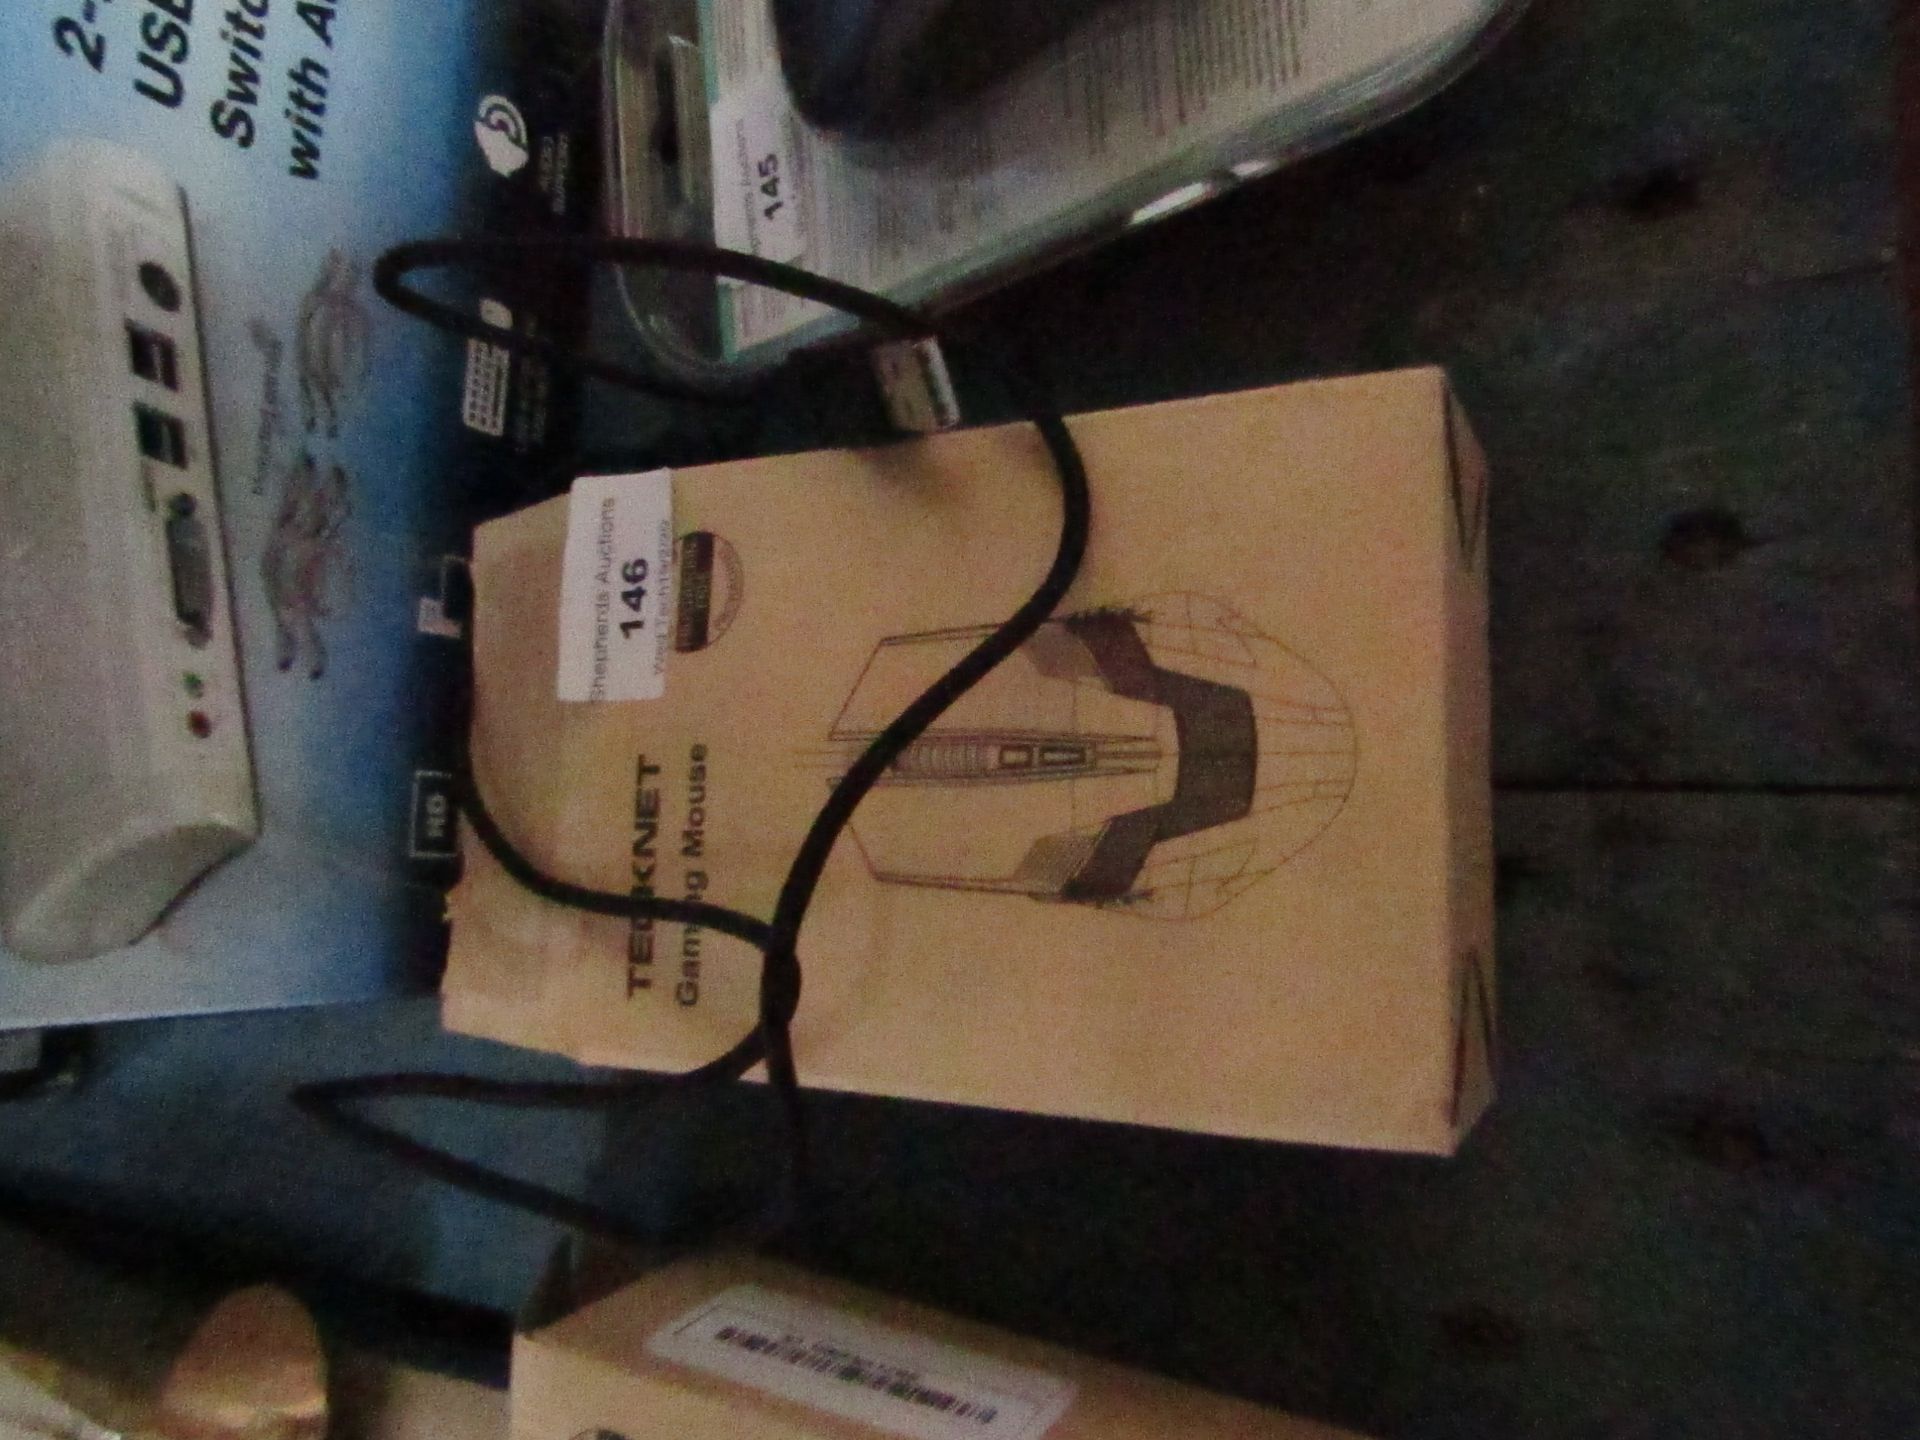 Tecknet gaming mouse, untested and boxed.